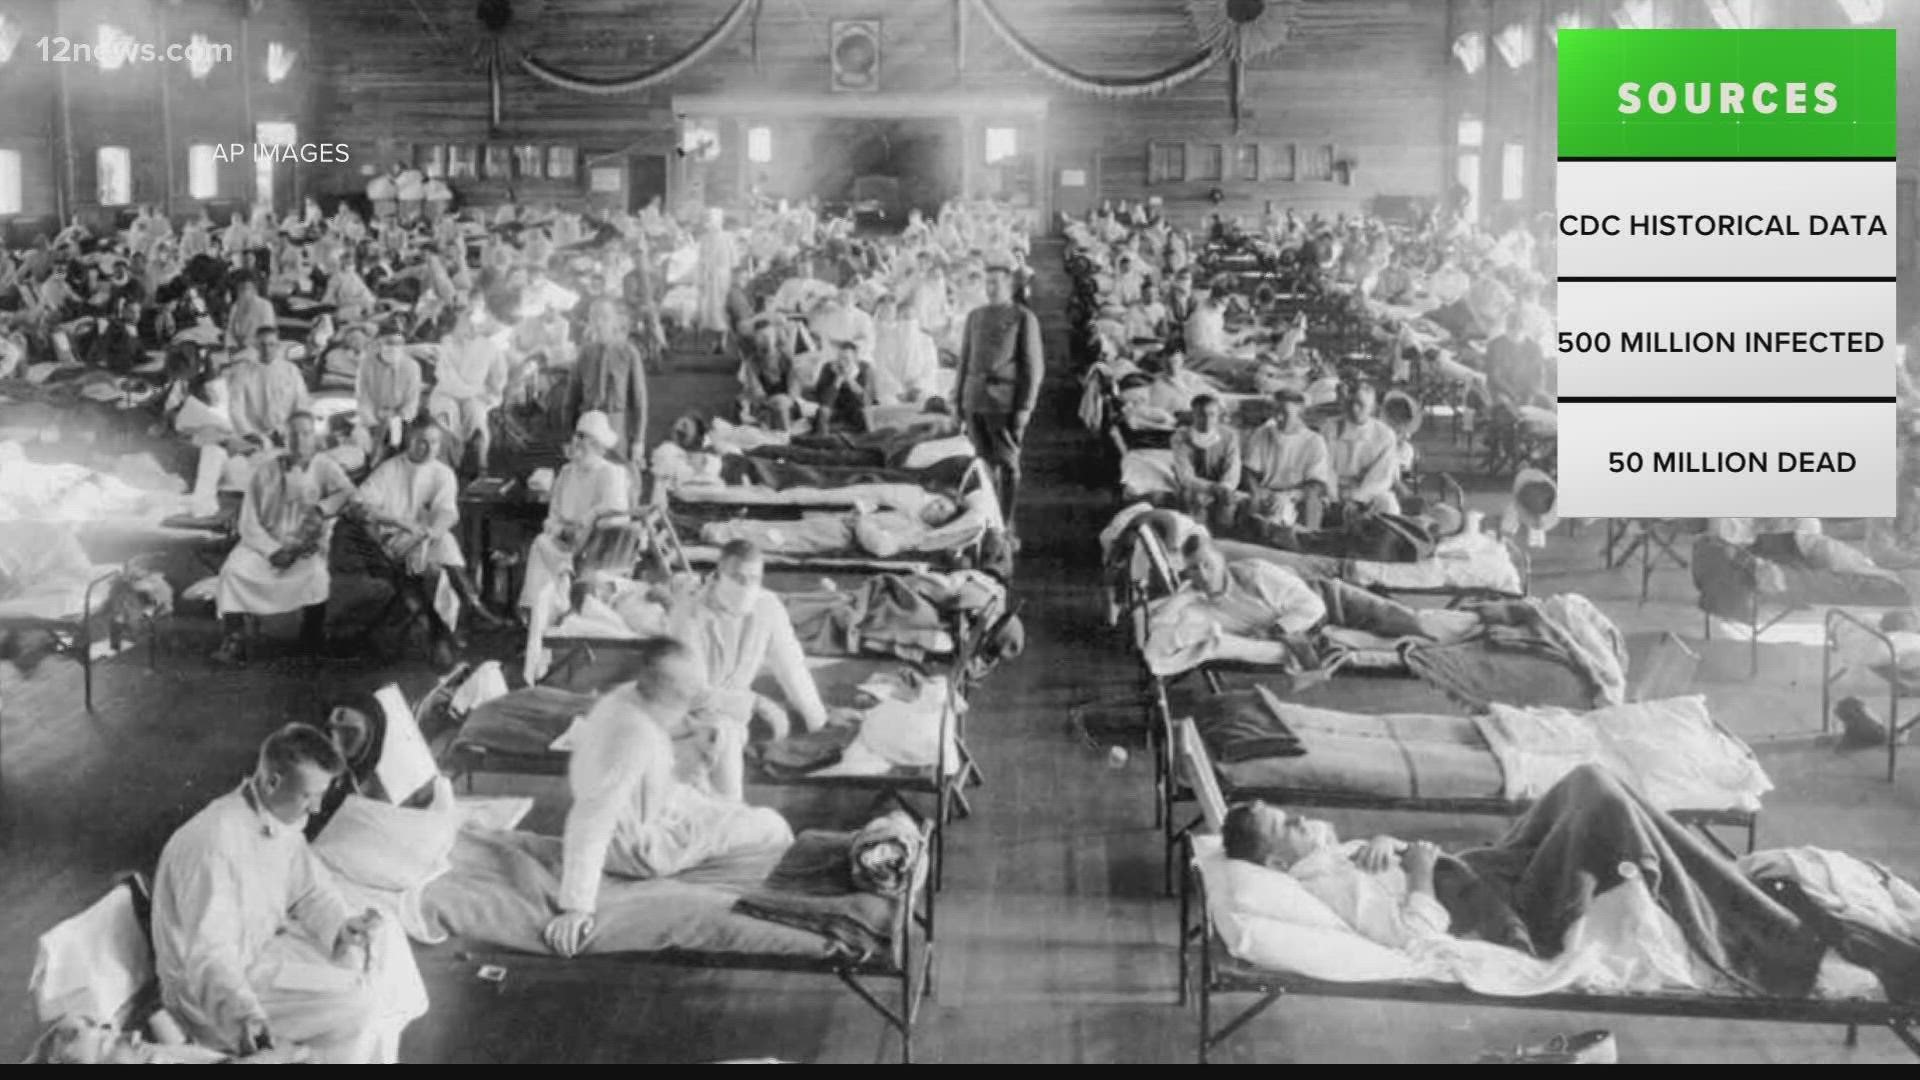 Is COVID-19 now worse than the Spanish Flu or 1918? One 12 News viewer asked so the Verify Team is verifying the answer.